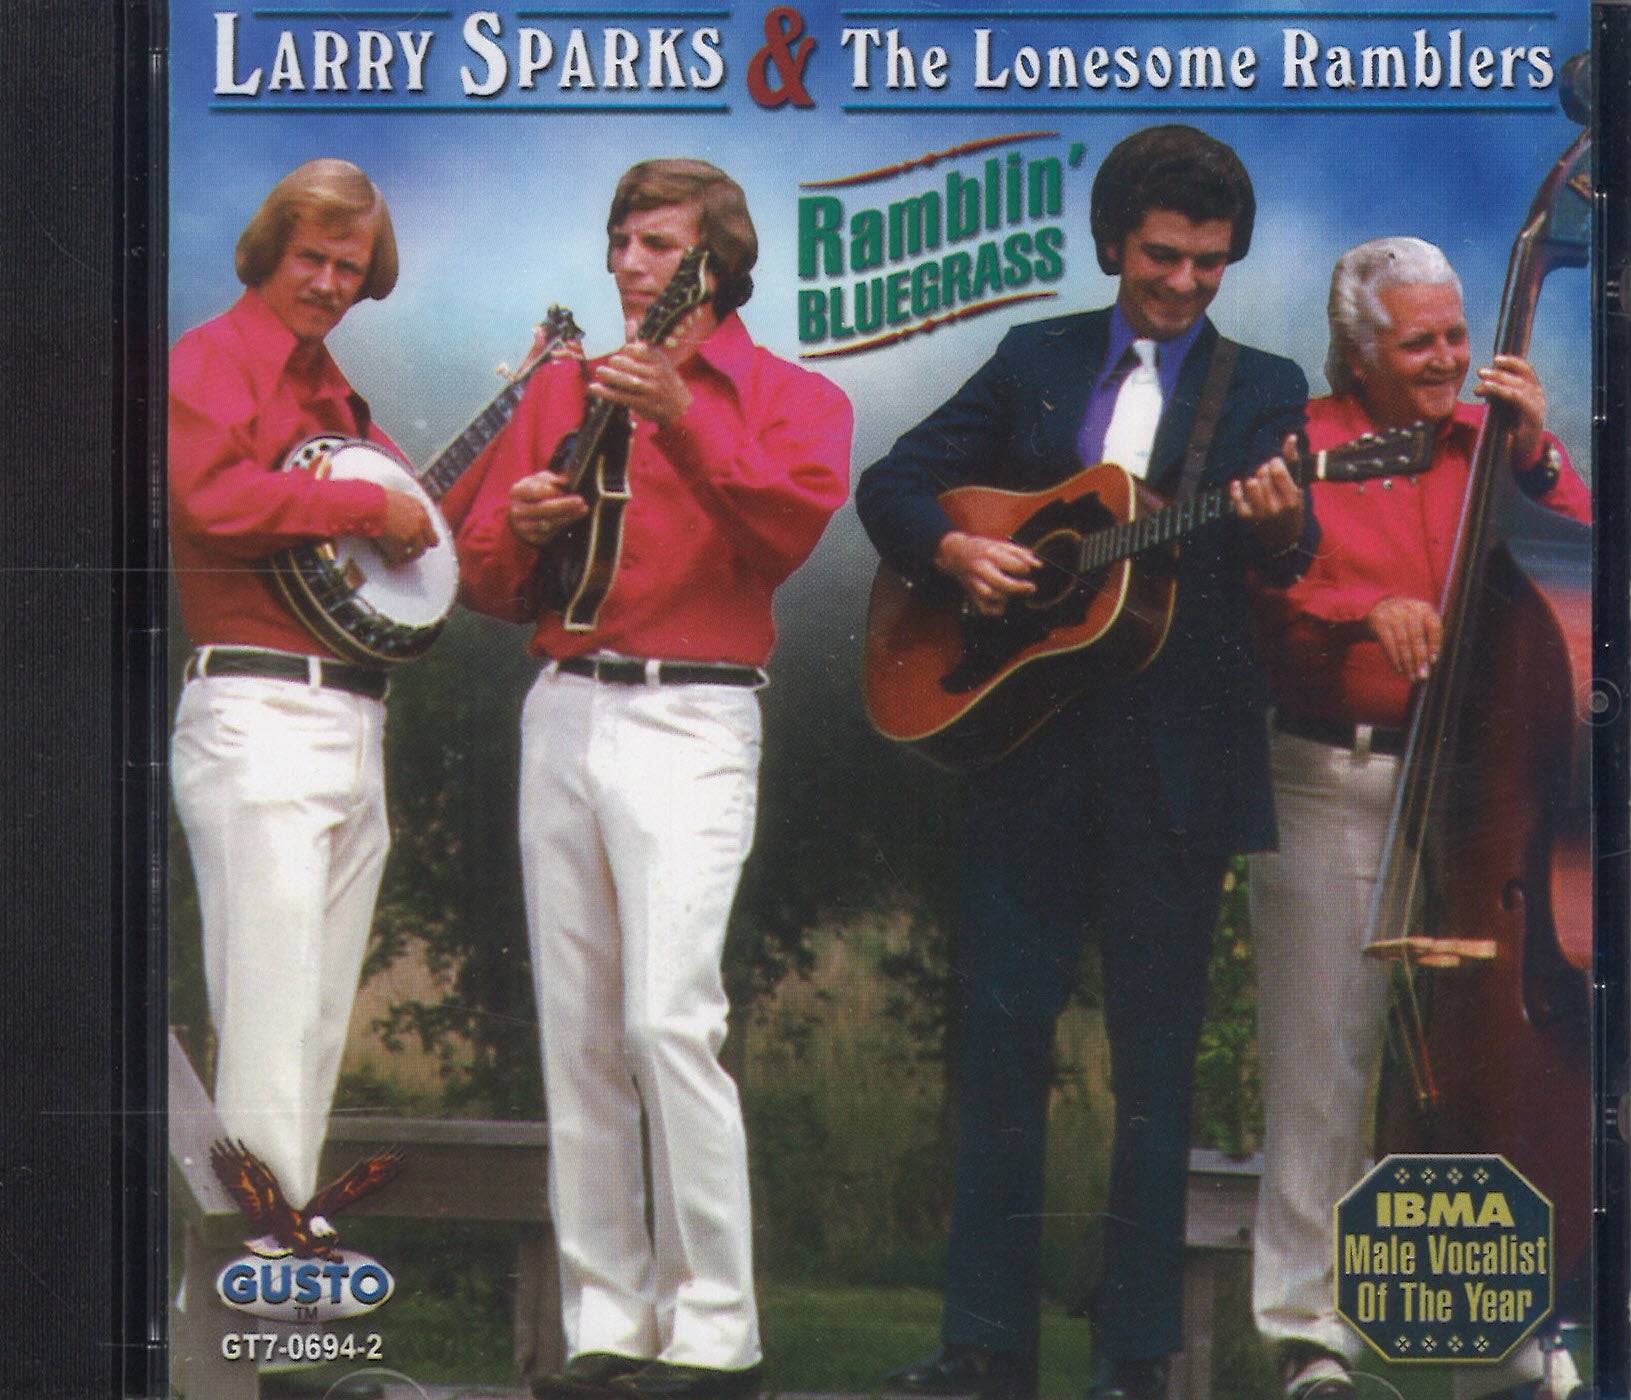 Larry Sparks & The Lonesome Ramblers Ramblin' Bluegrass